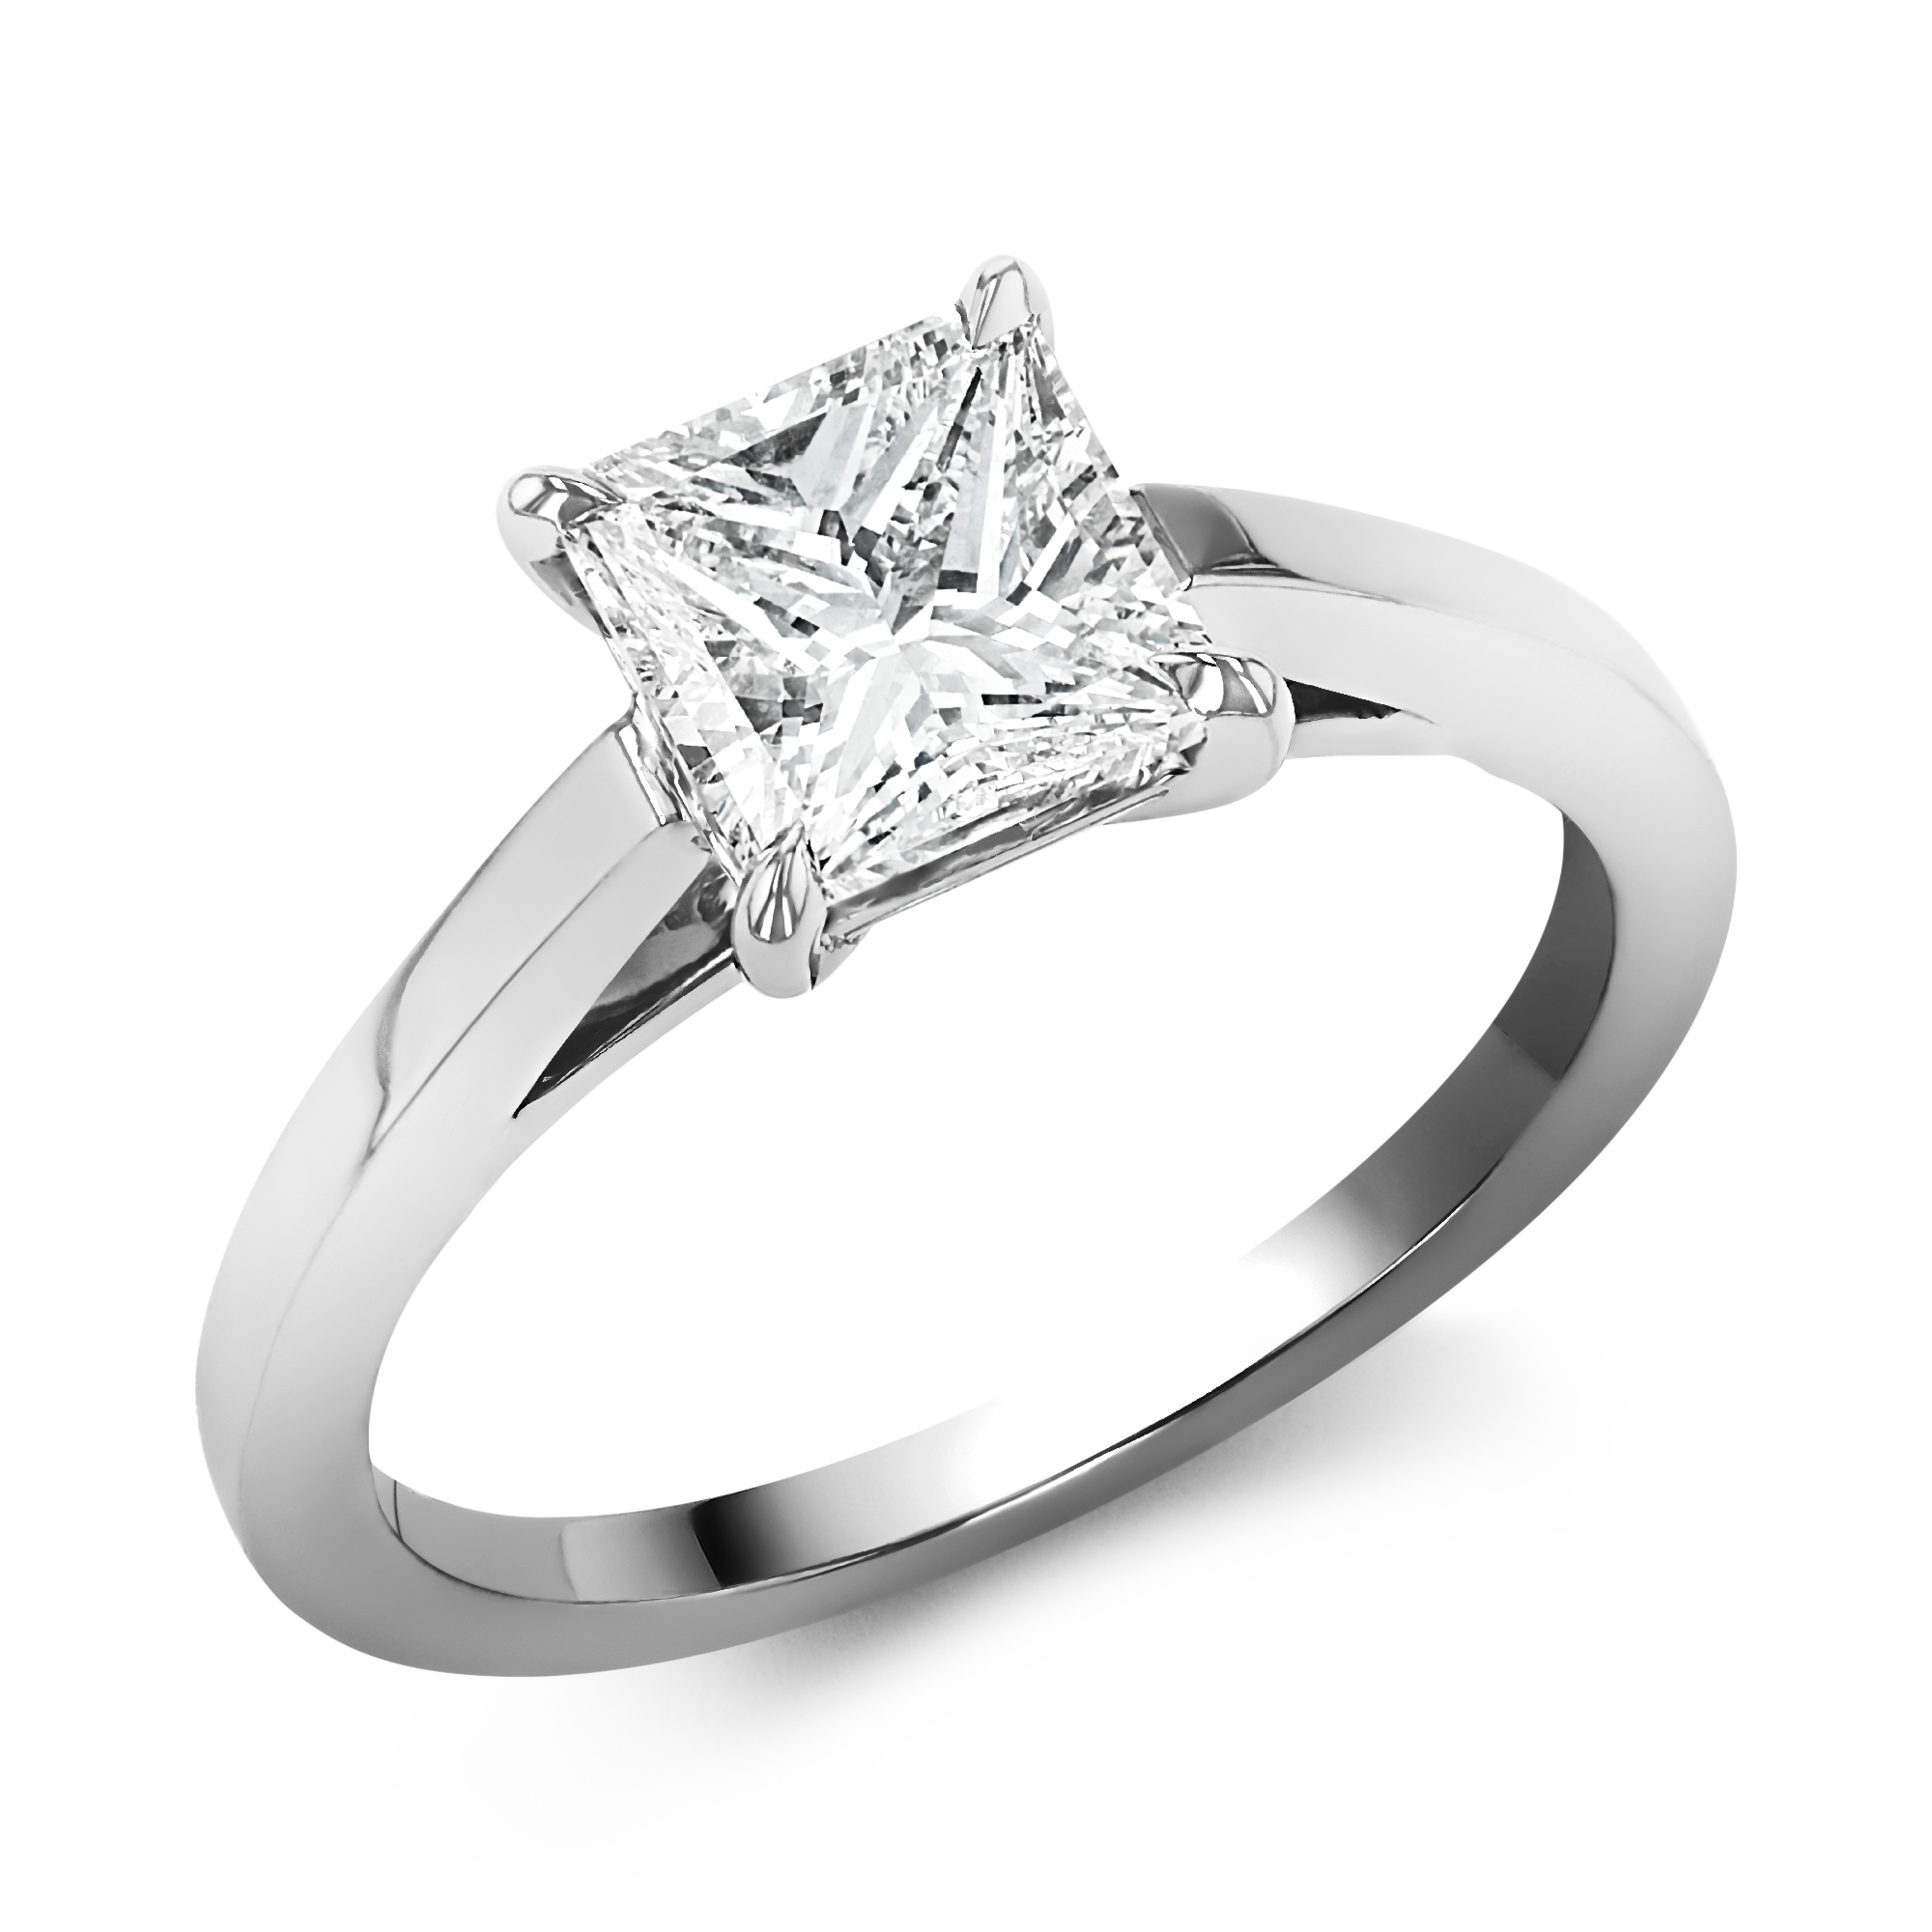 1.51CT Diamond Solitaire Ring Princess Cut, Four Claw Set_1